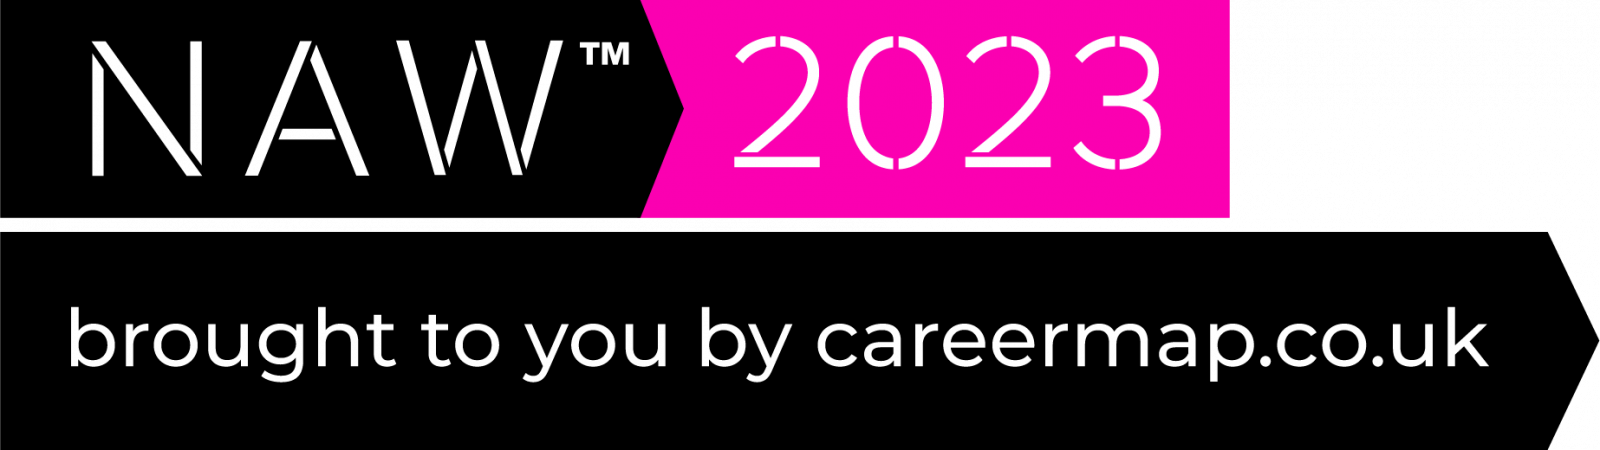 National Apprenticeship Week 2023 cover image